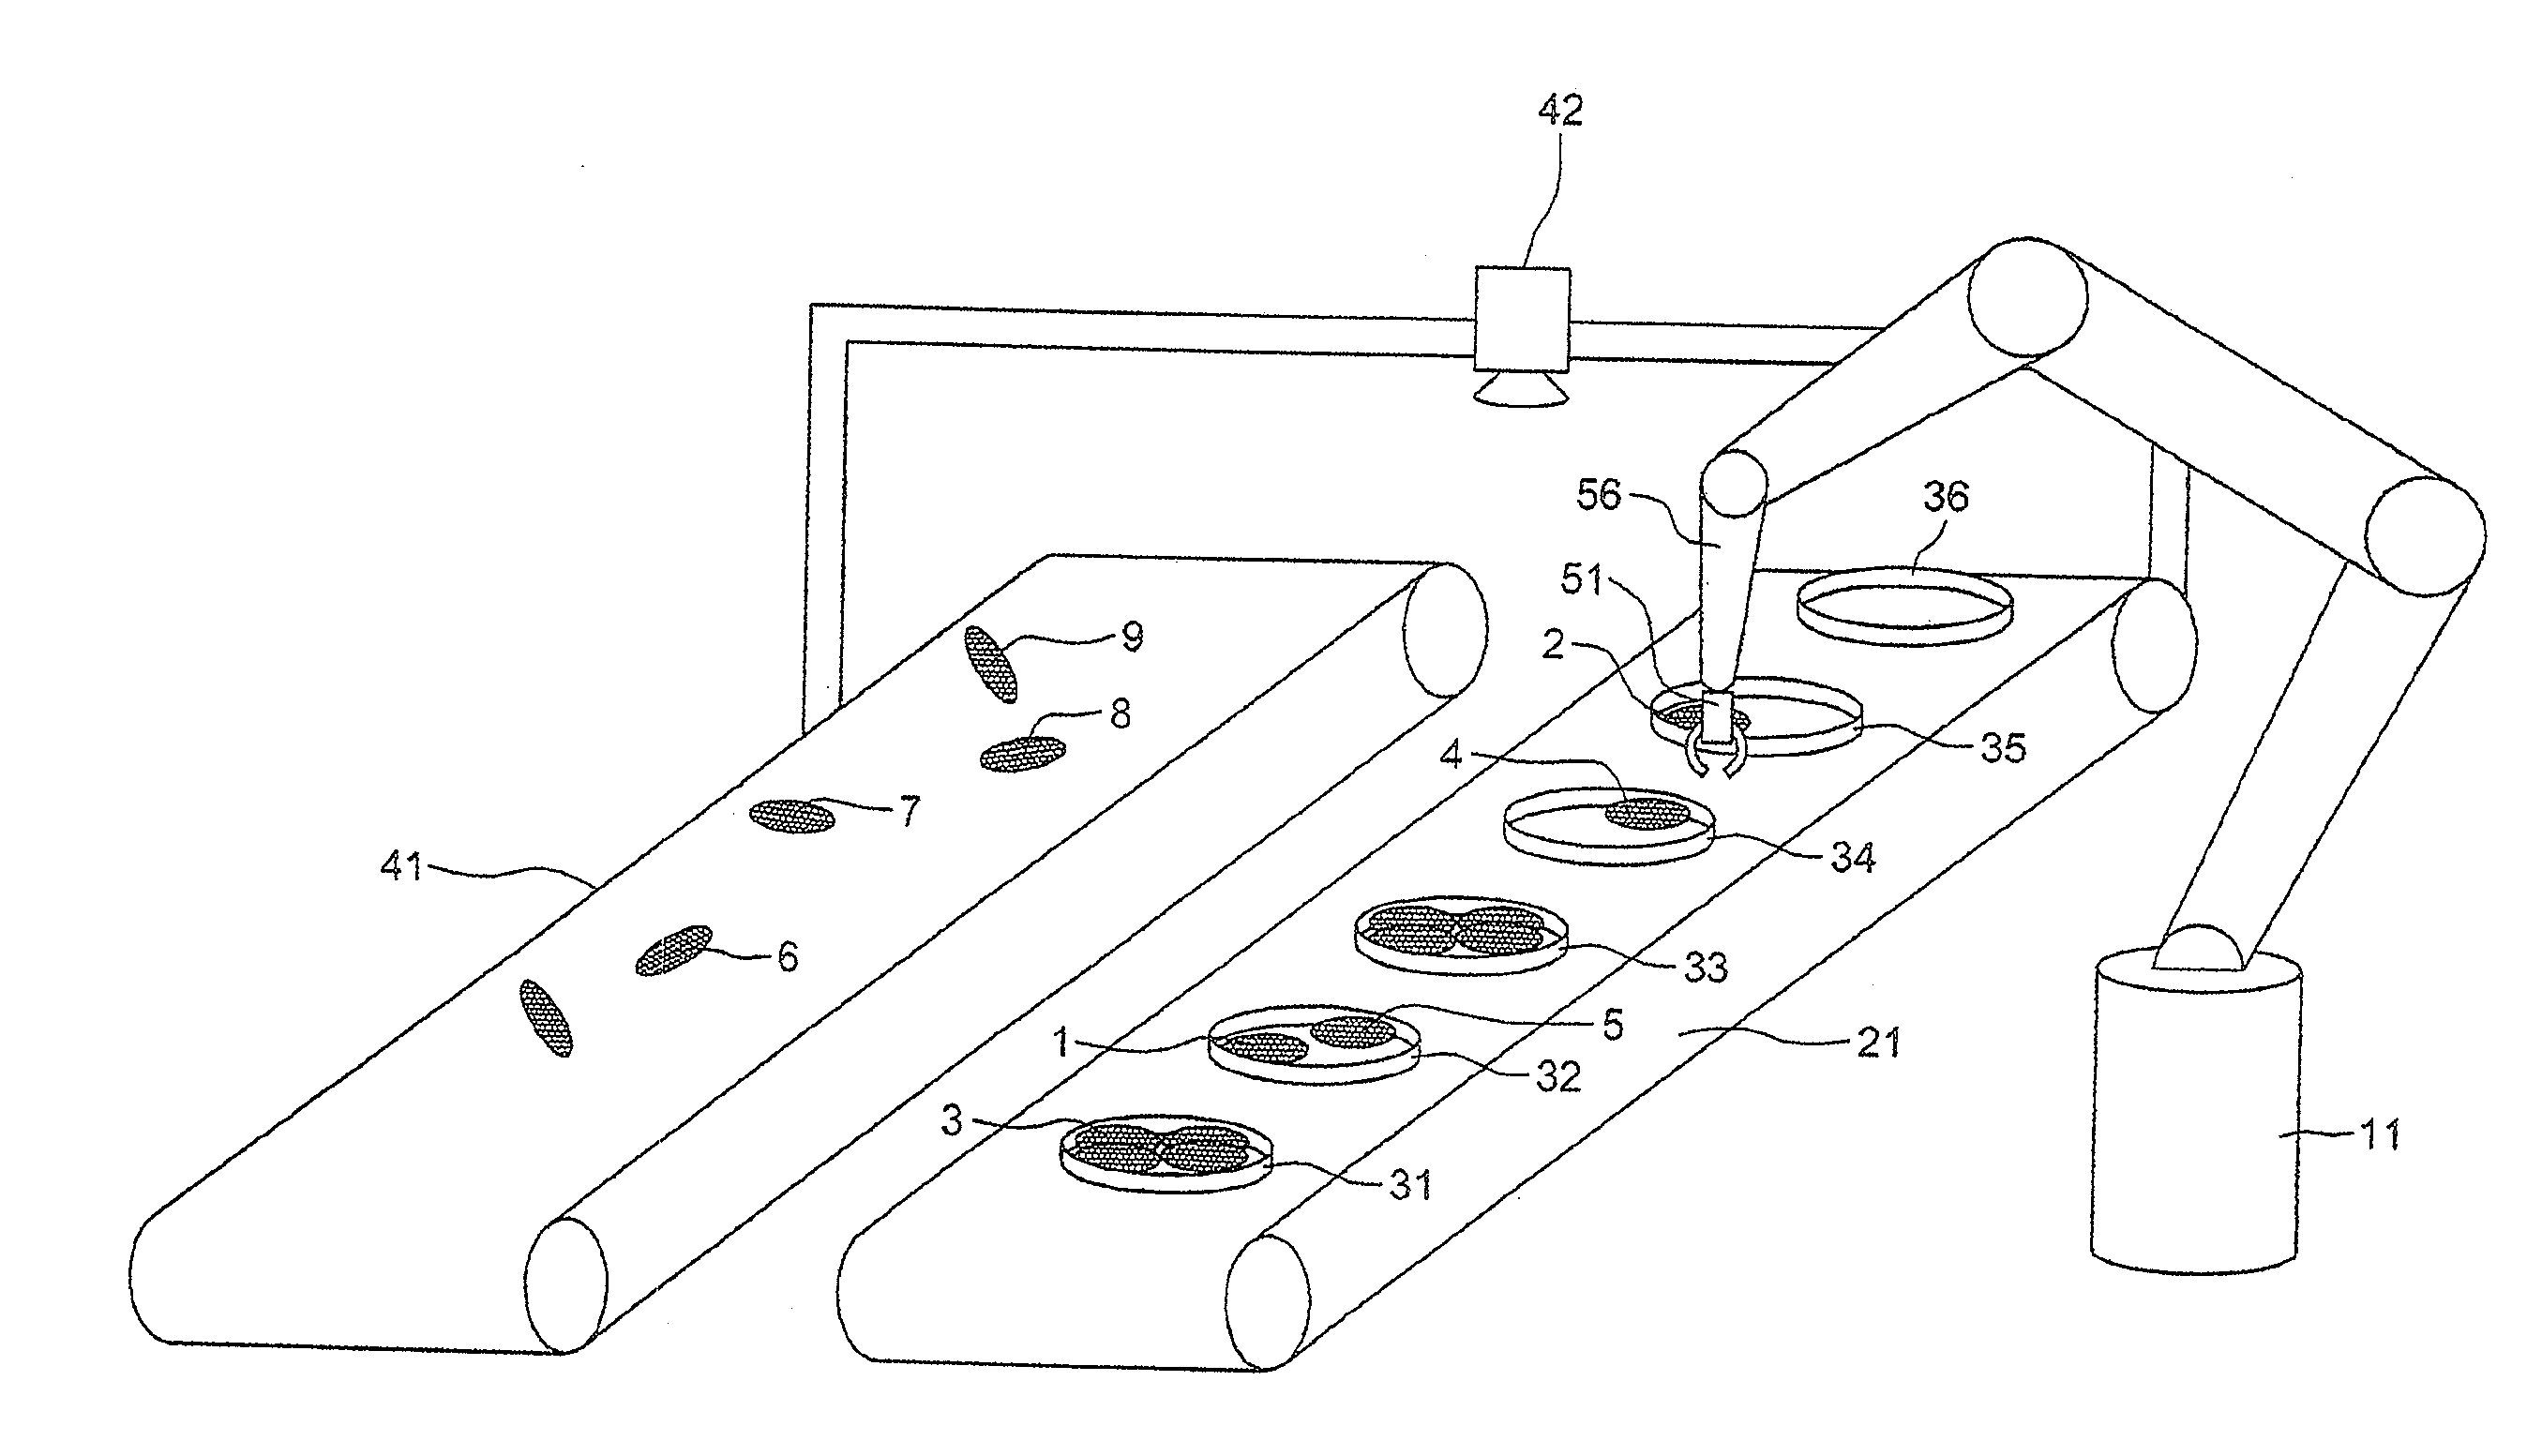 Method of treating objects according to their individual weights